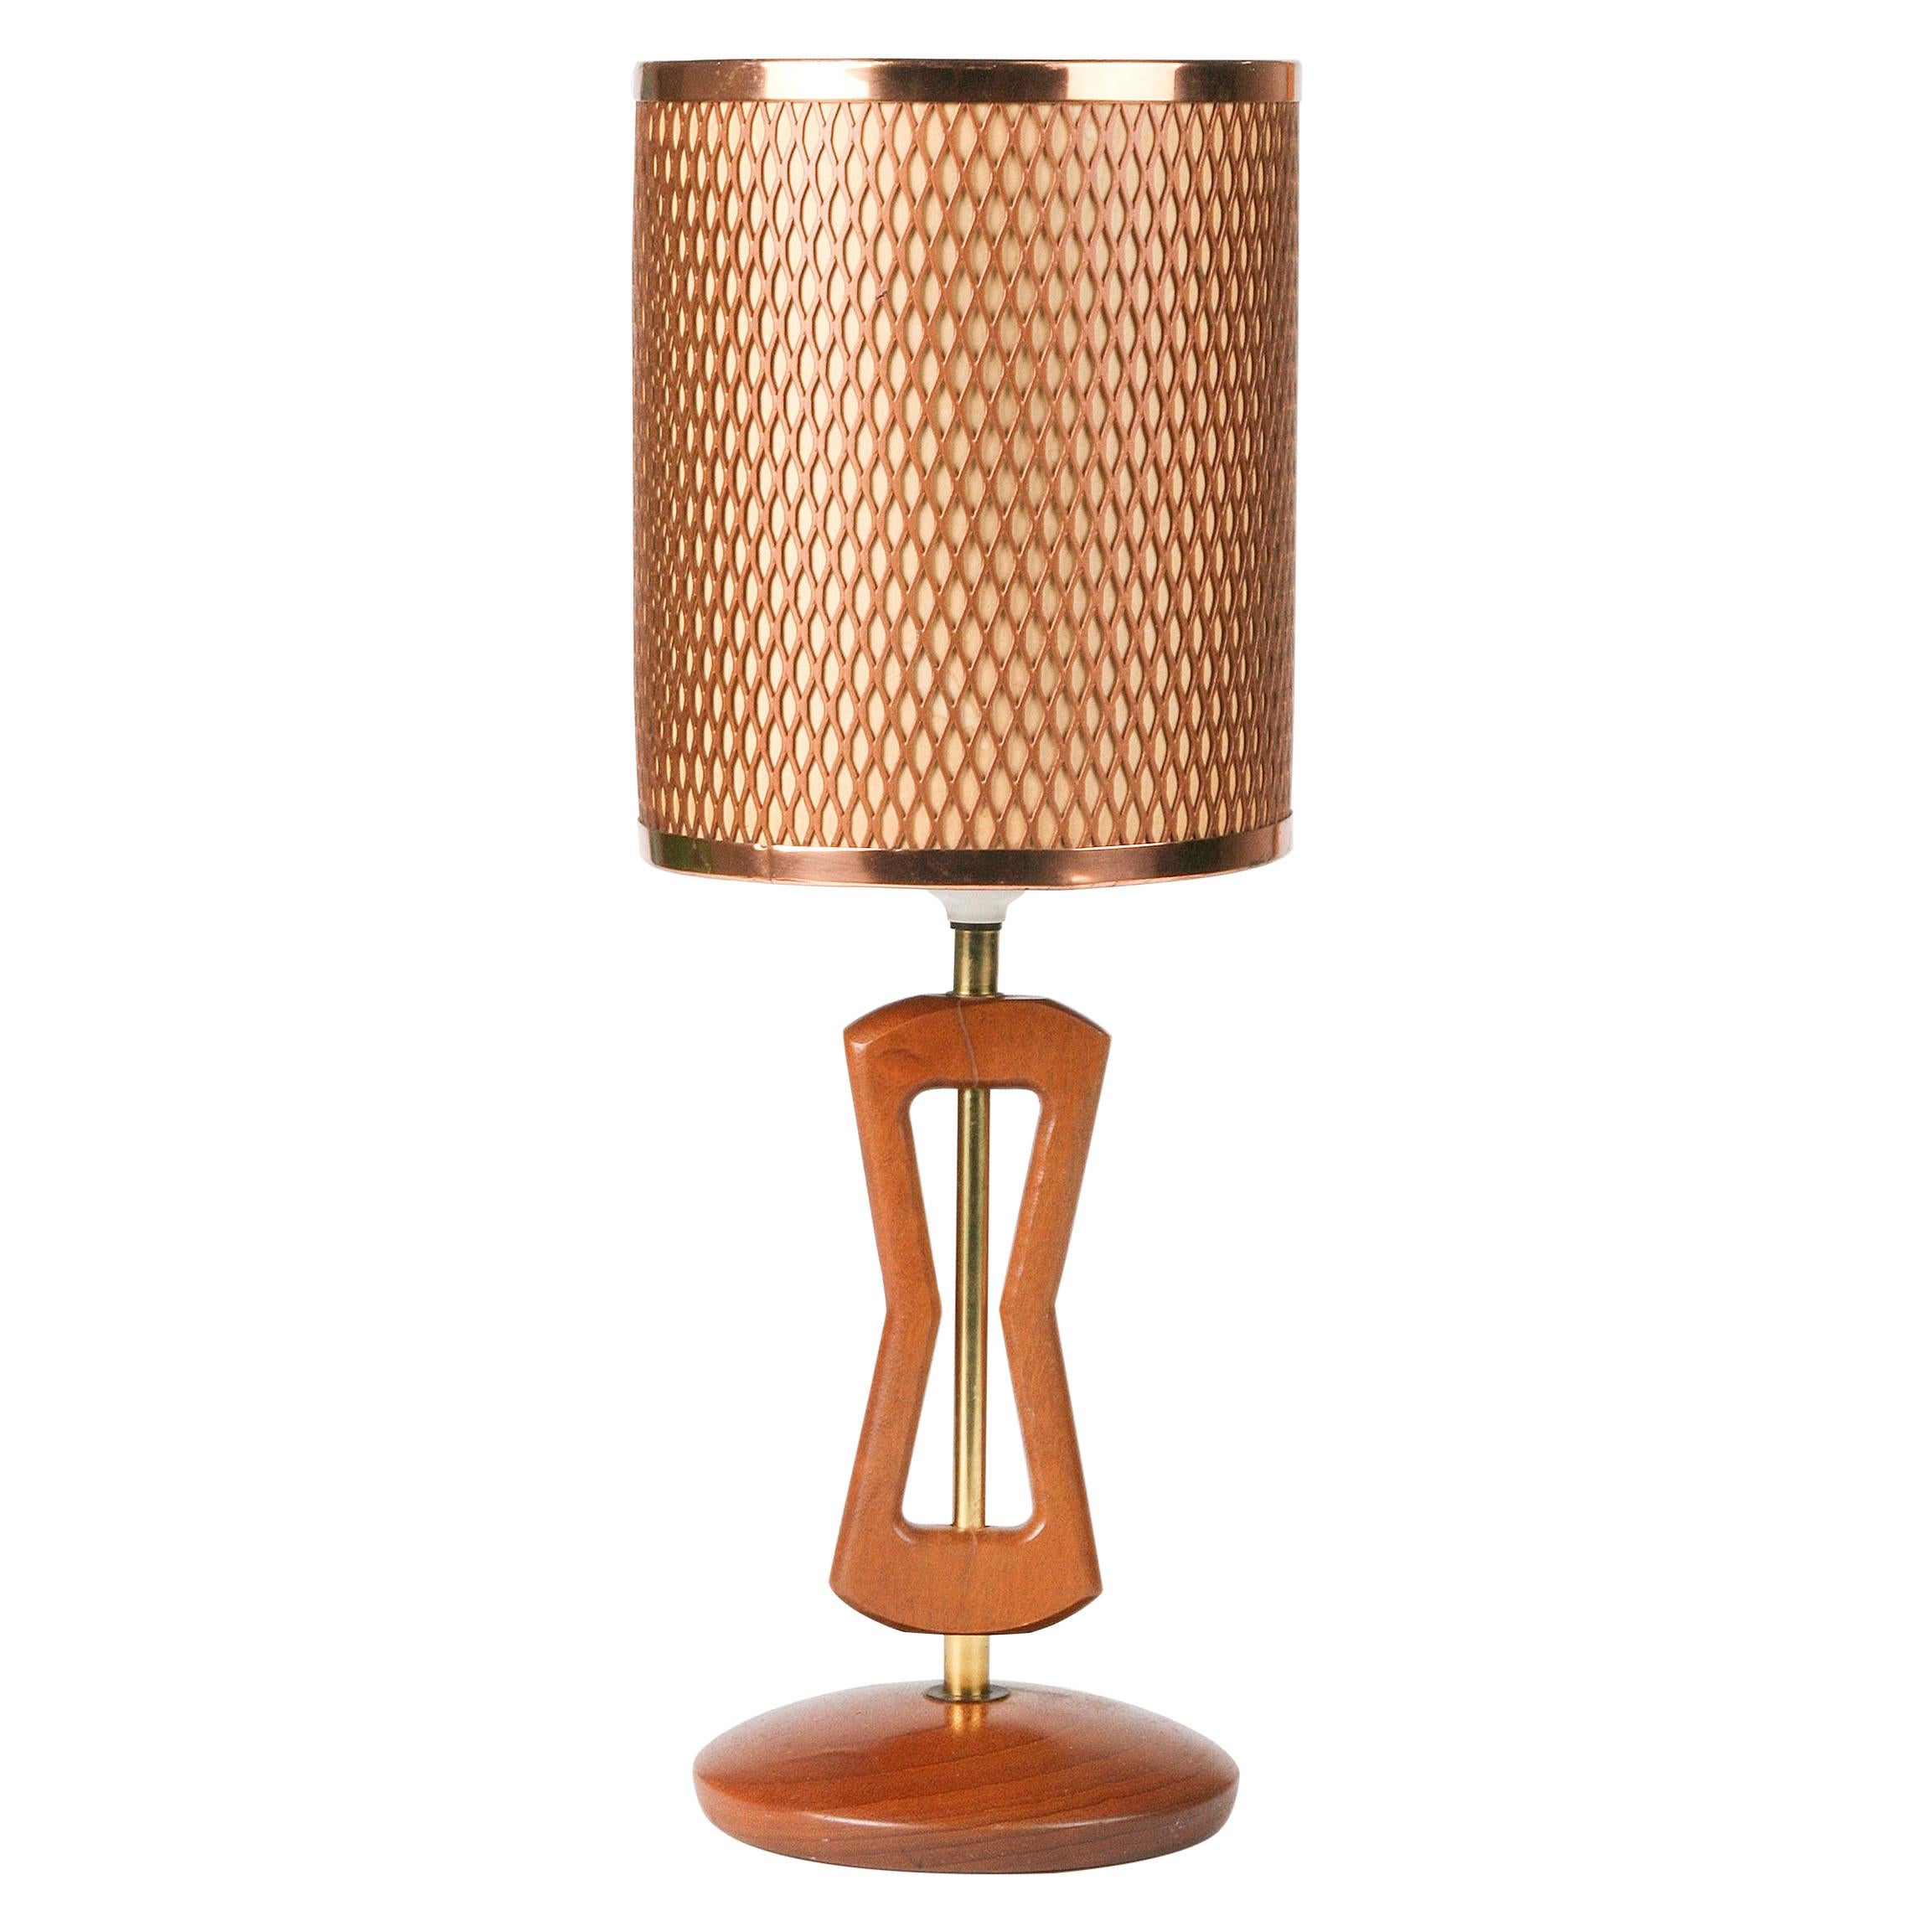 Midcentury Table Lamp with Diamonds Lattice Pattern Copper Shade